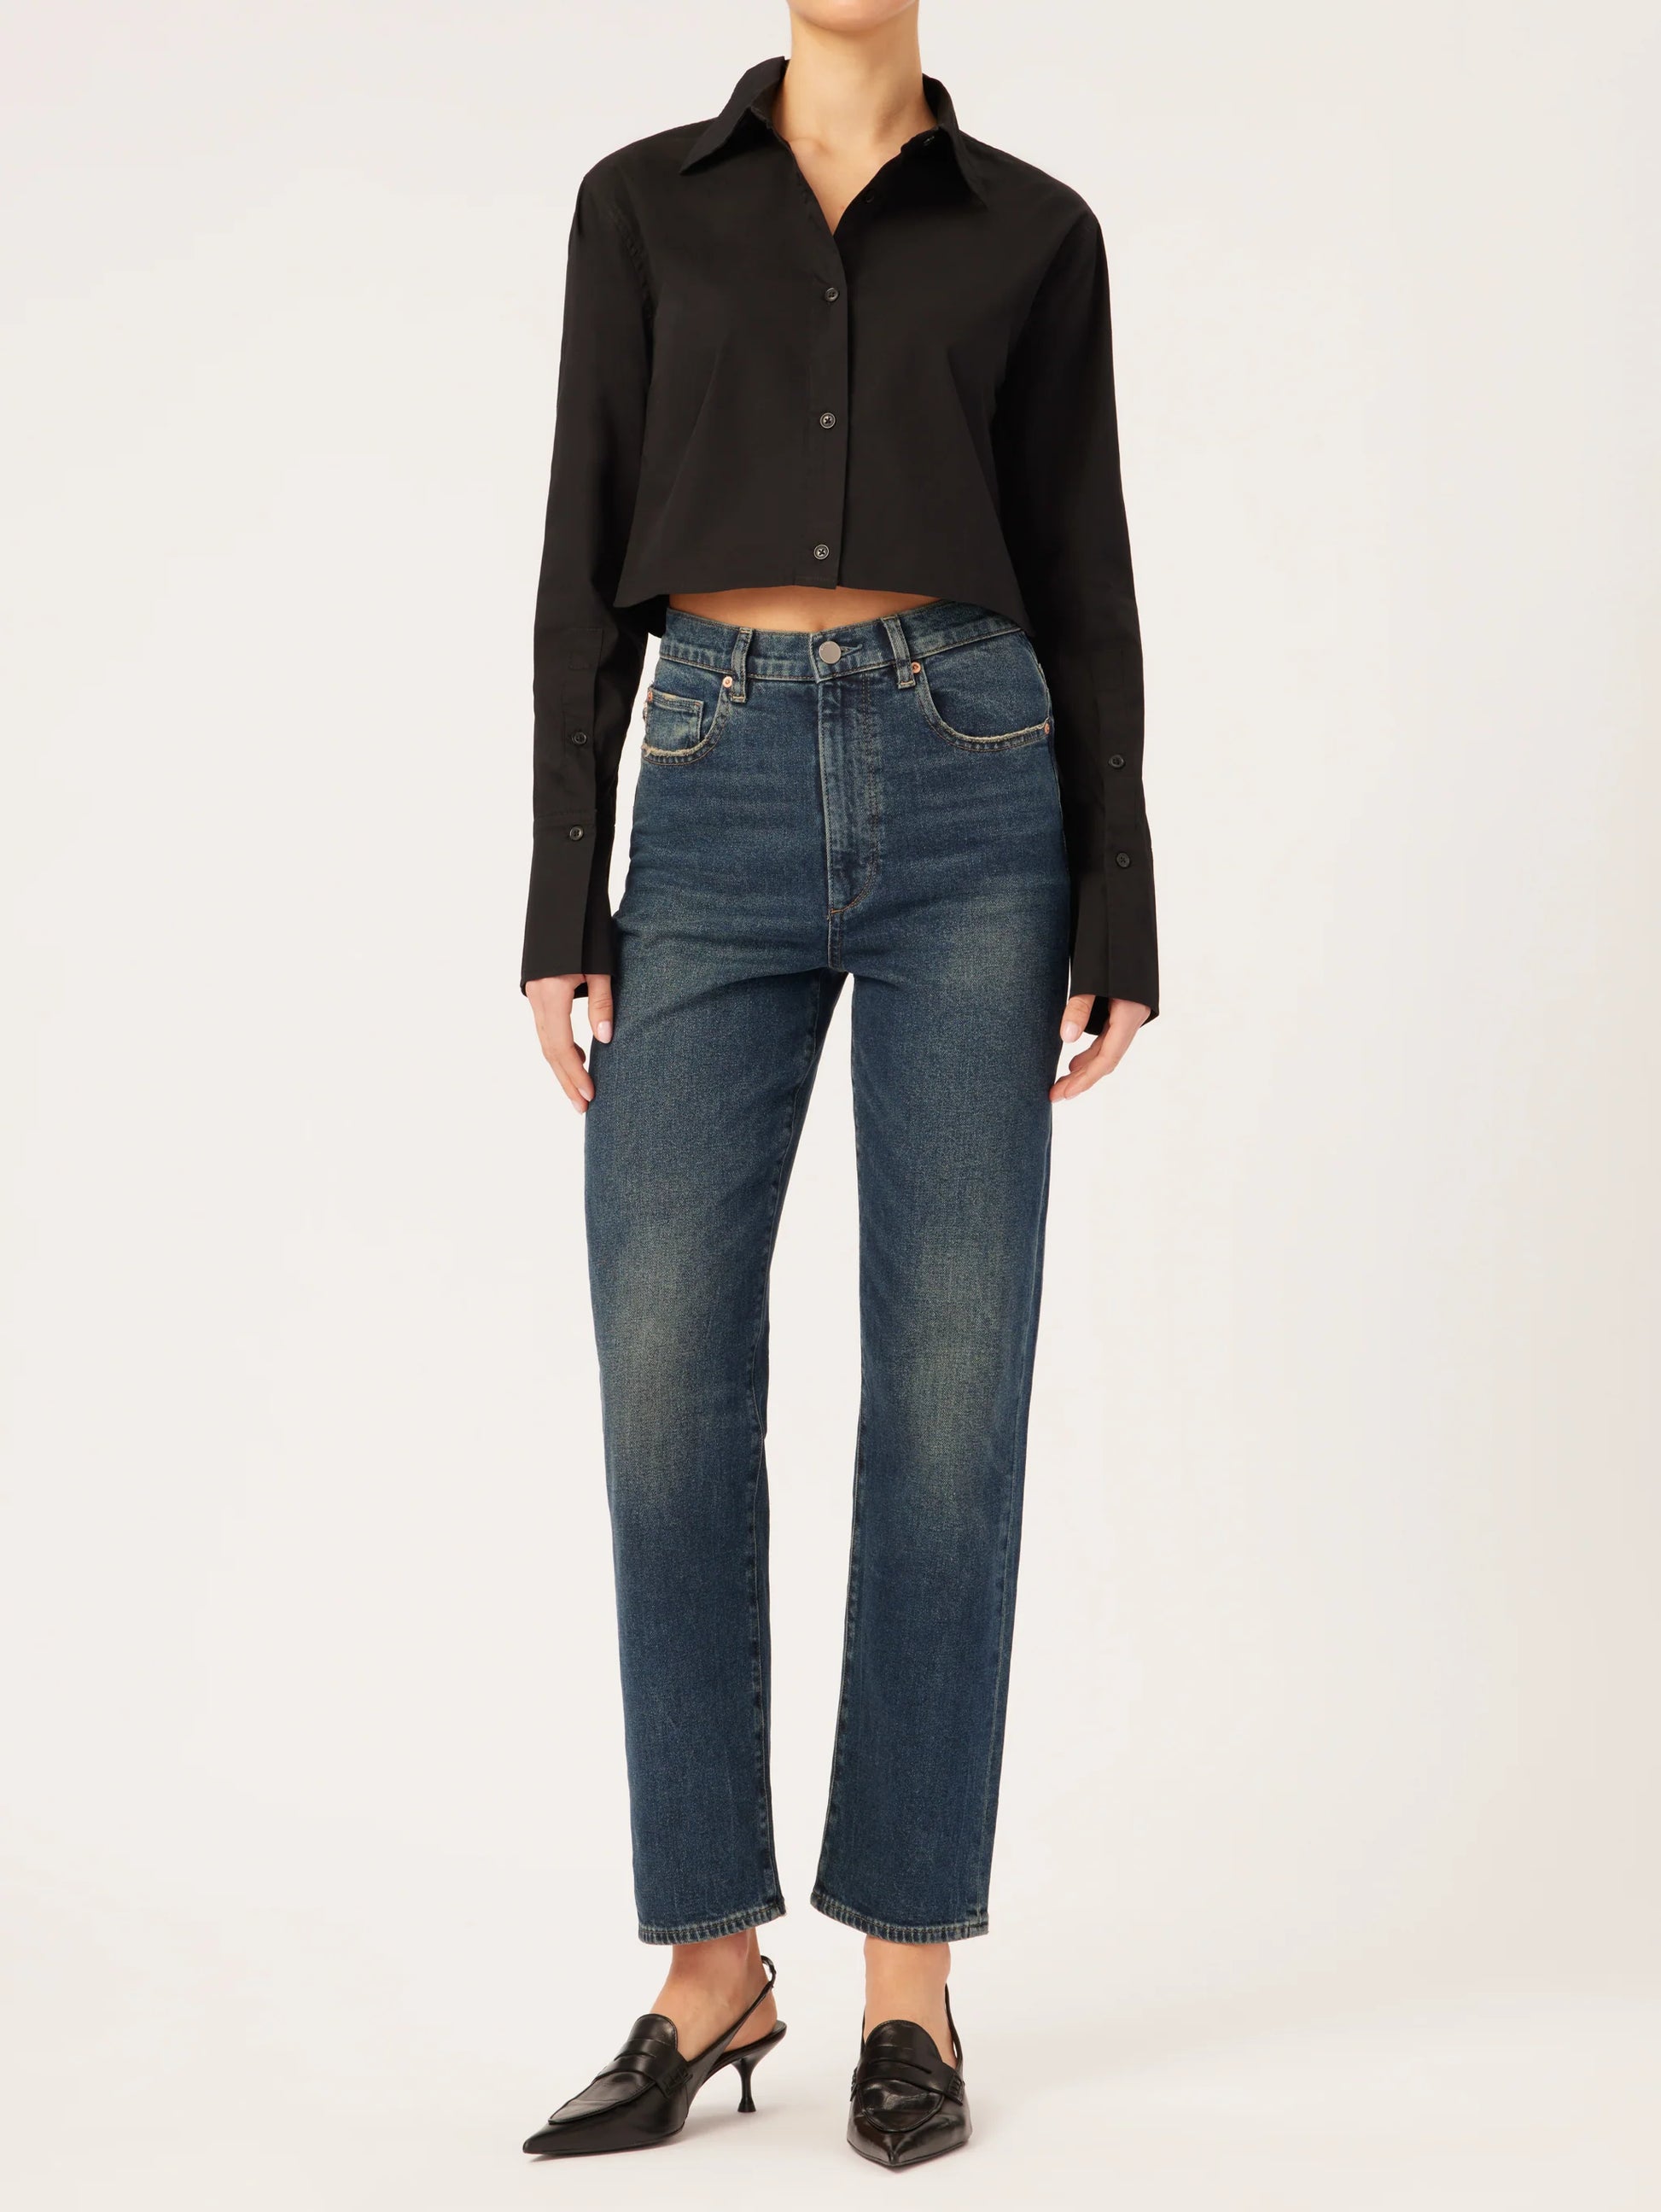 The model is wearing a black blouse and DL1961 Enora Cigarette High Rise - Broadbay jeans.